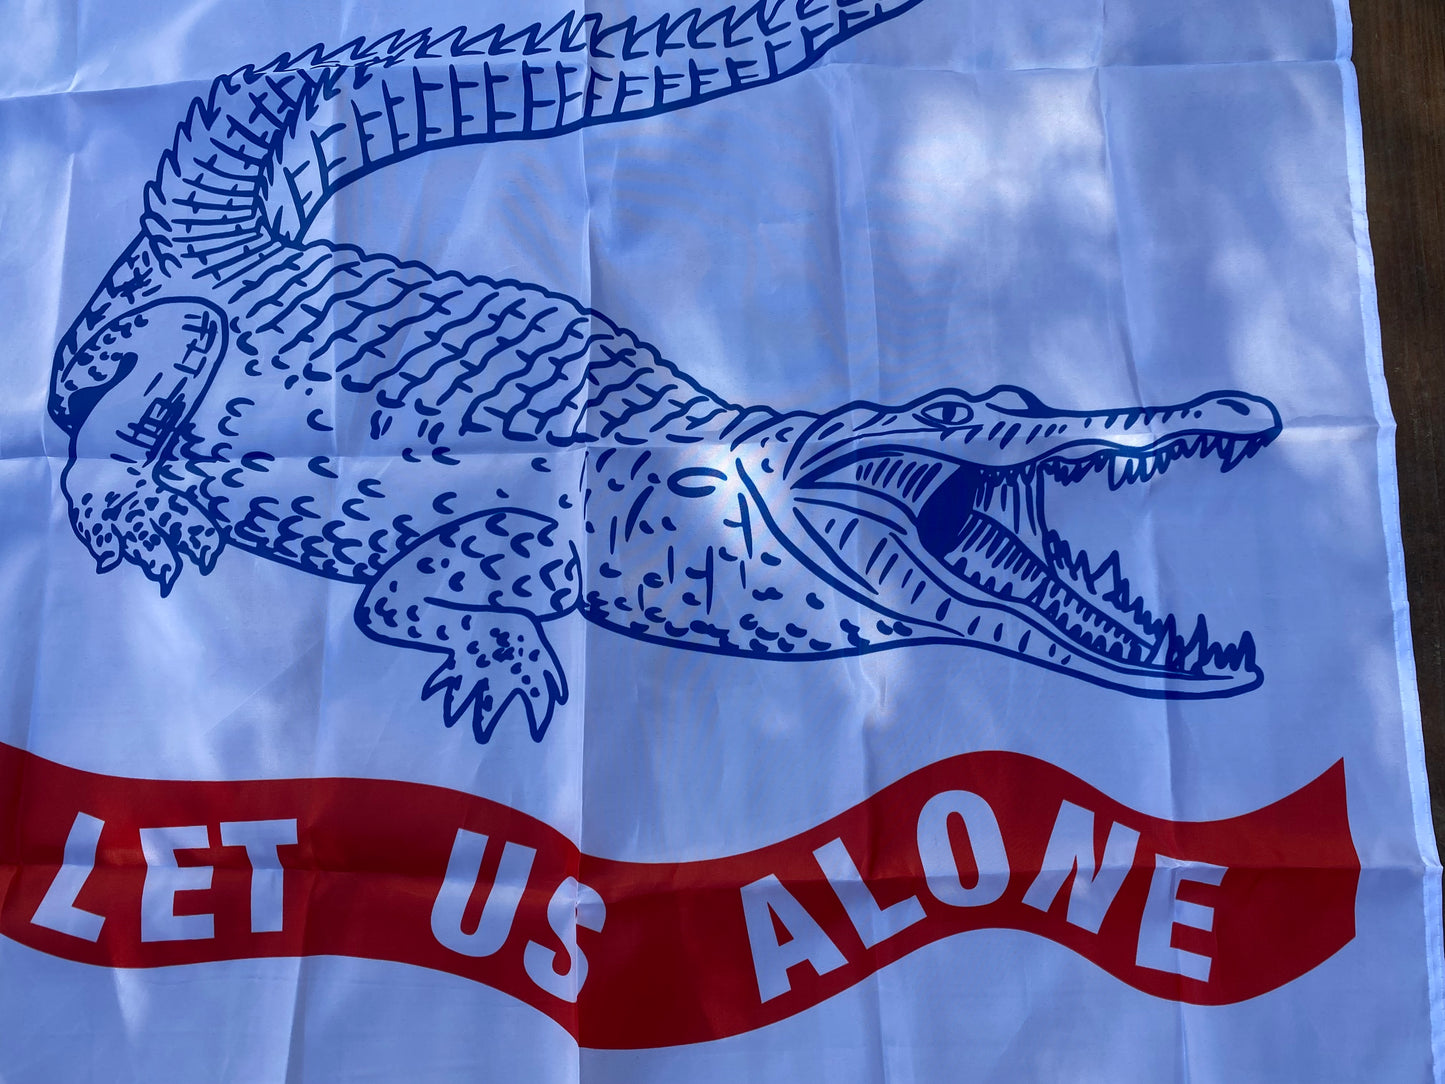 "Let us alone" House Flag